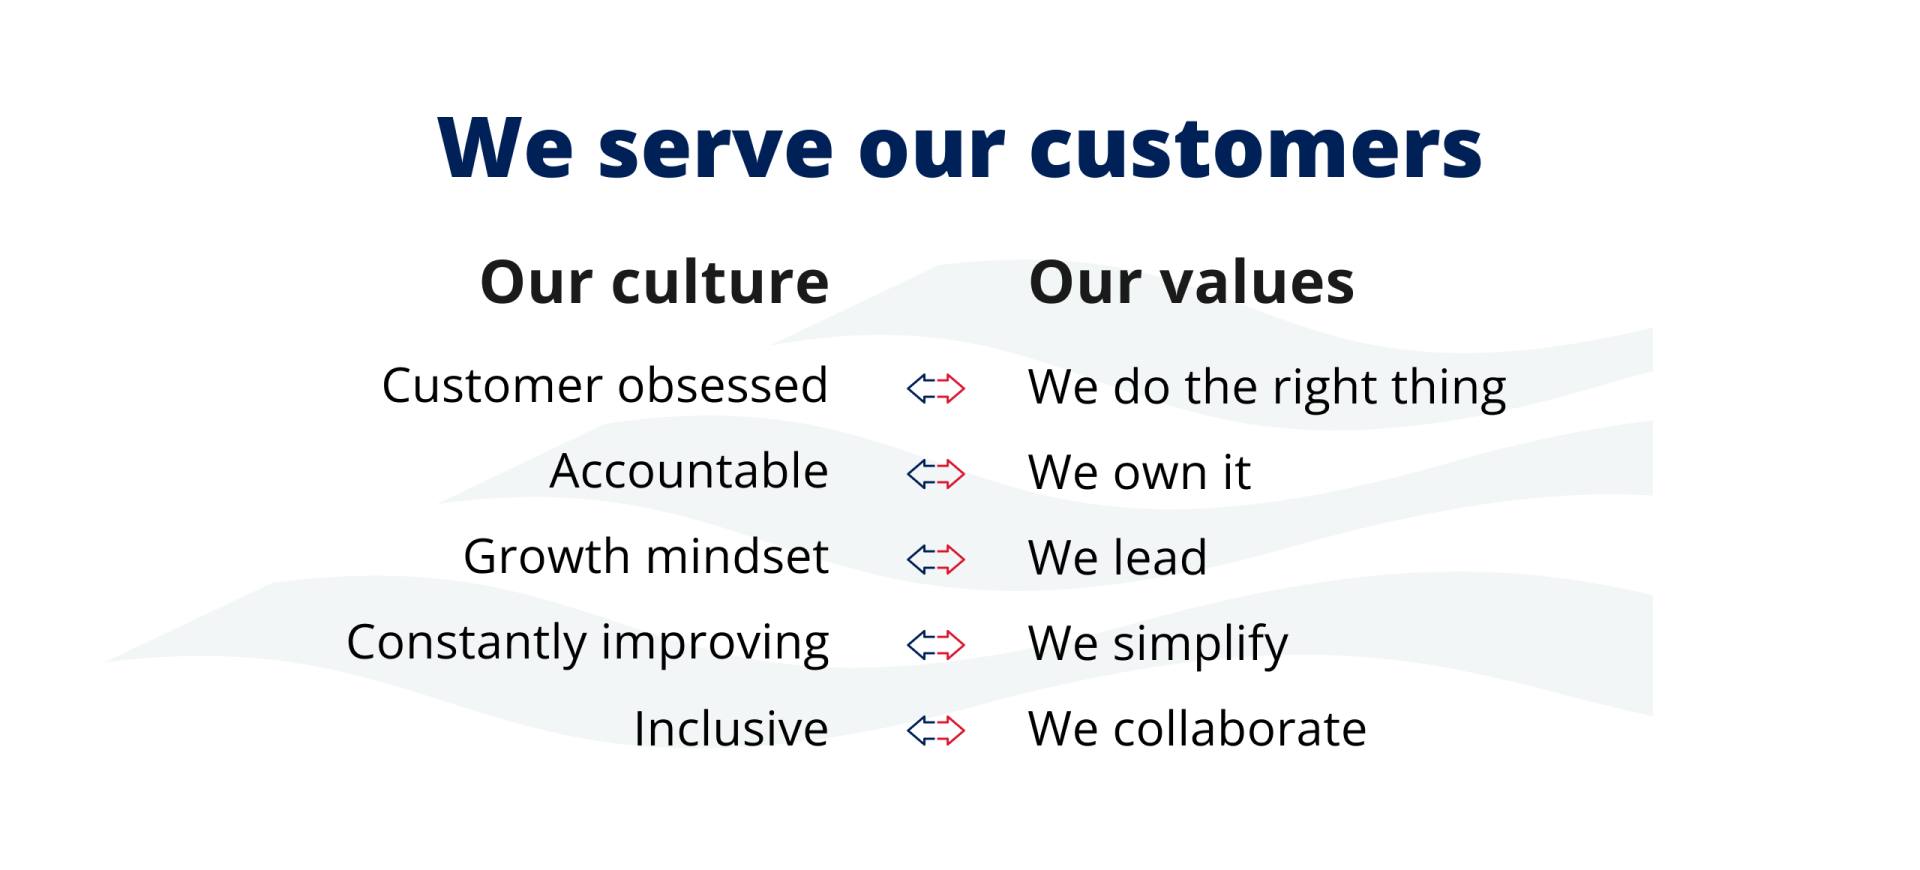 We serve our customers. Our culture and our values. Customer obsessed - we do the right thing. Accountable - we own it. Growth mindset - we lead. Constantly improving - we simplify. Inclusive - we collaborate. 